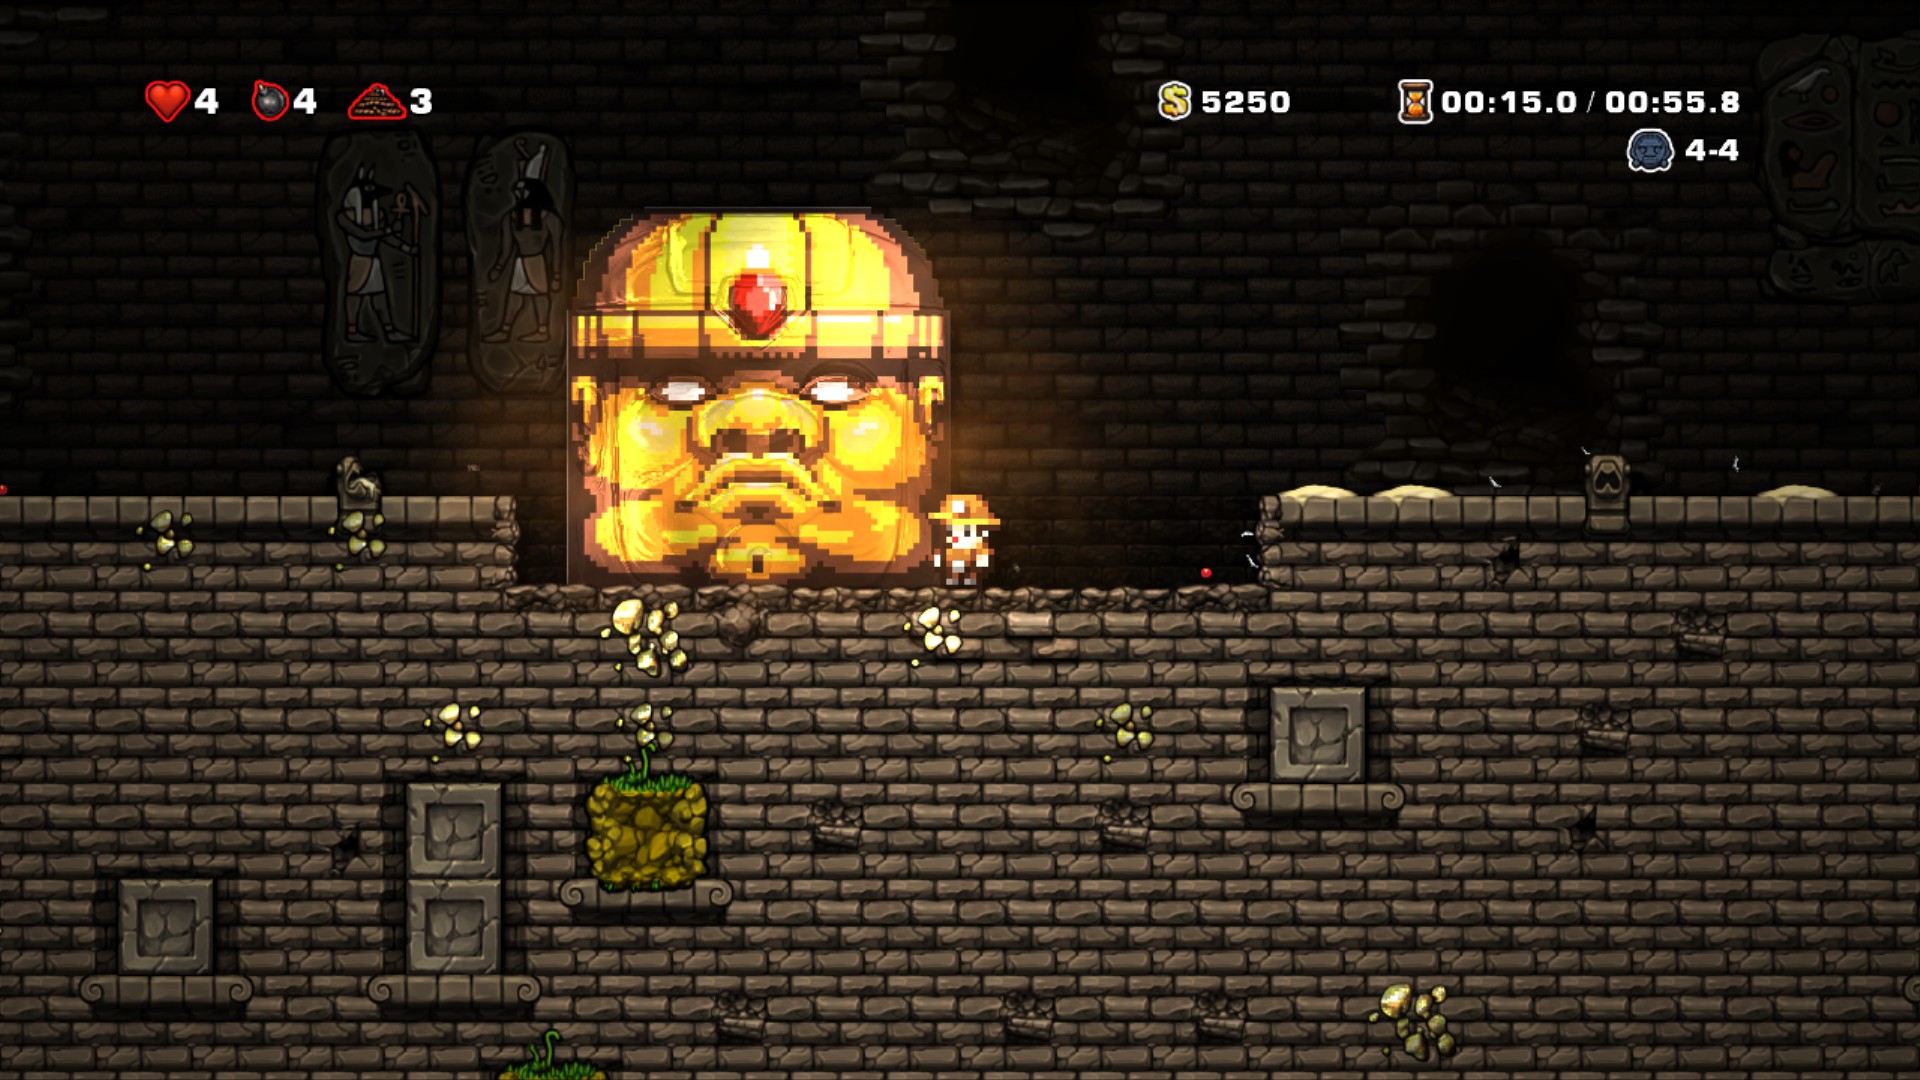 Spelunky Image In Collection